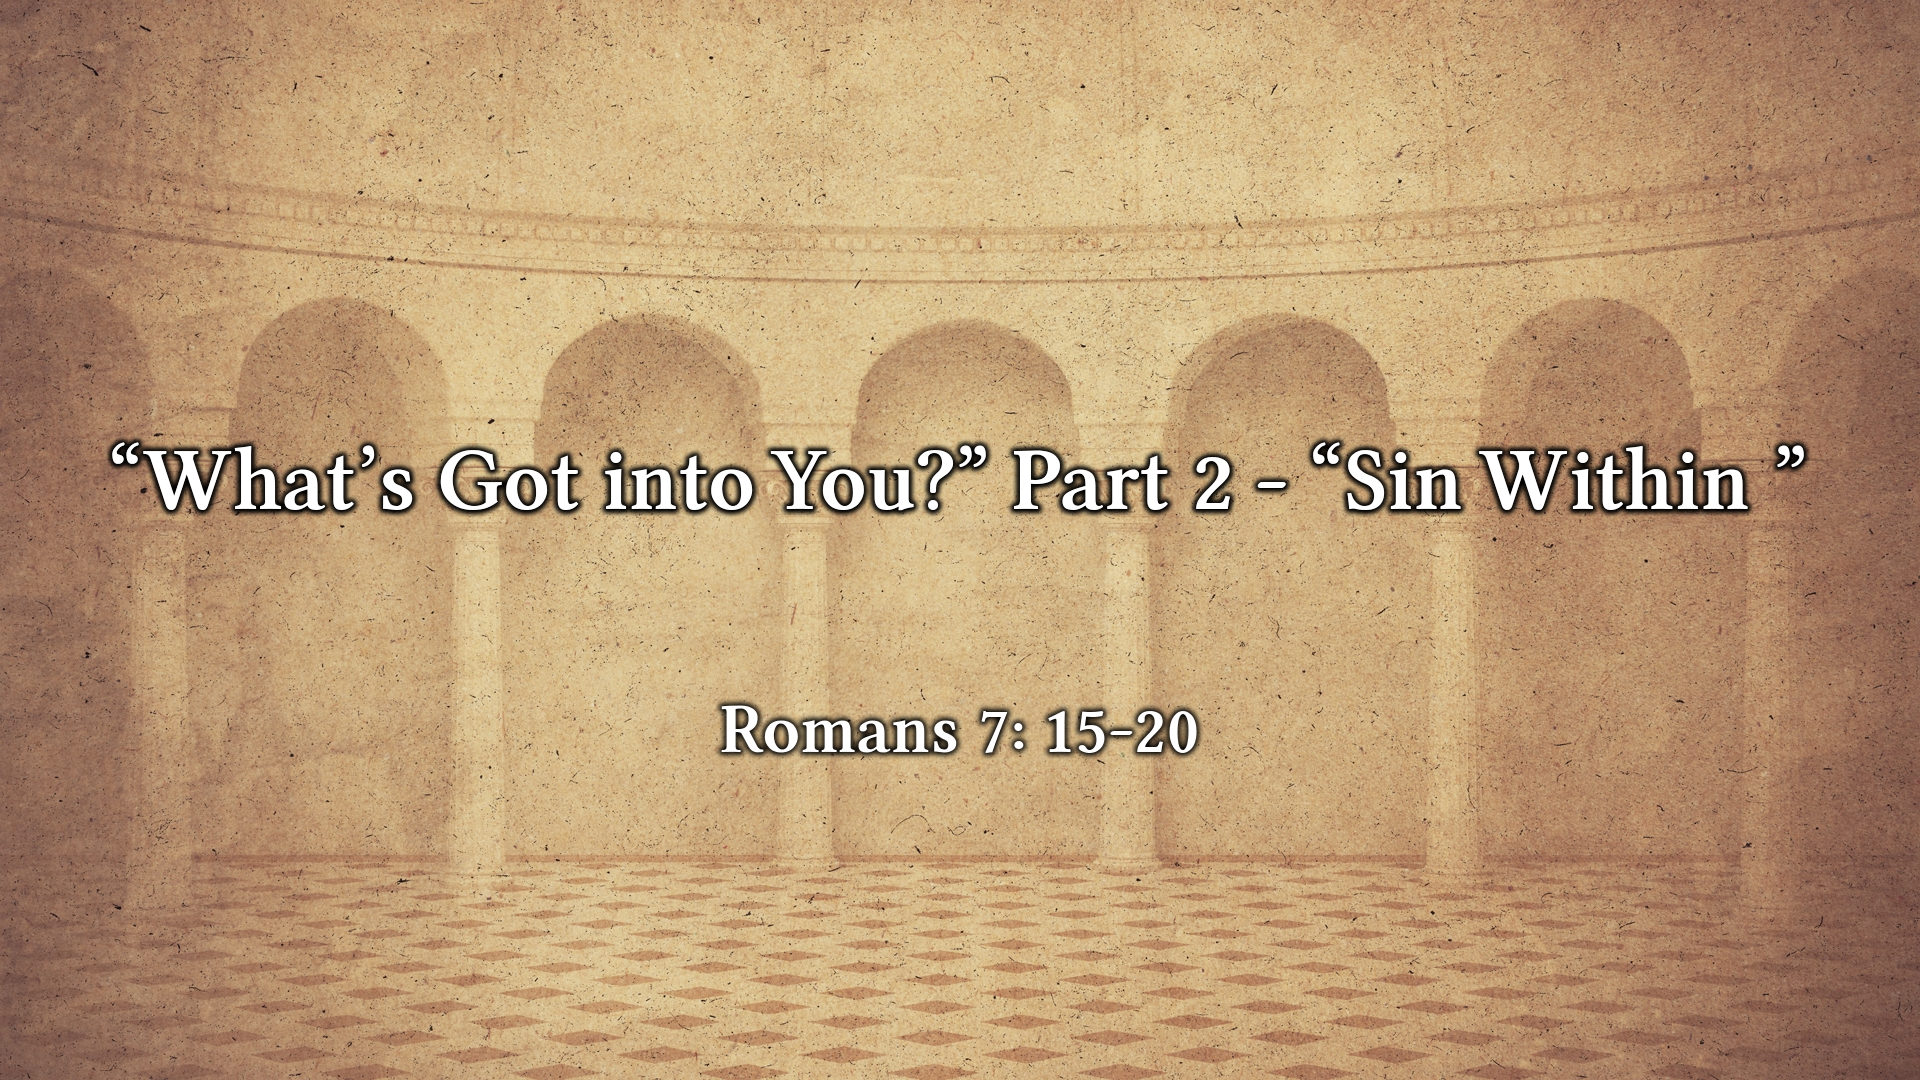 Dec 26, 2021 - "What's Got into You?" Part 2 - "Sin Within"  (Video) - Romans 7: 15-20